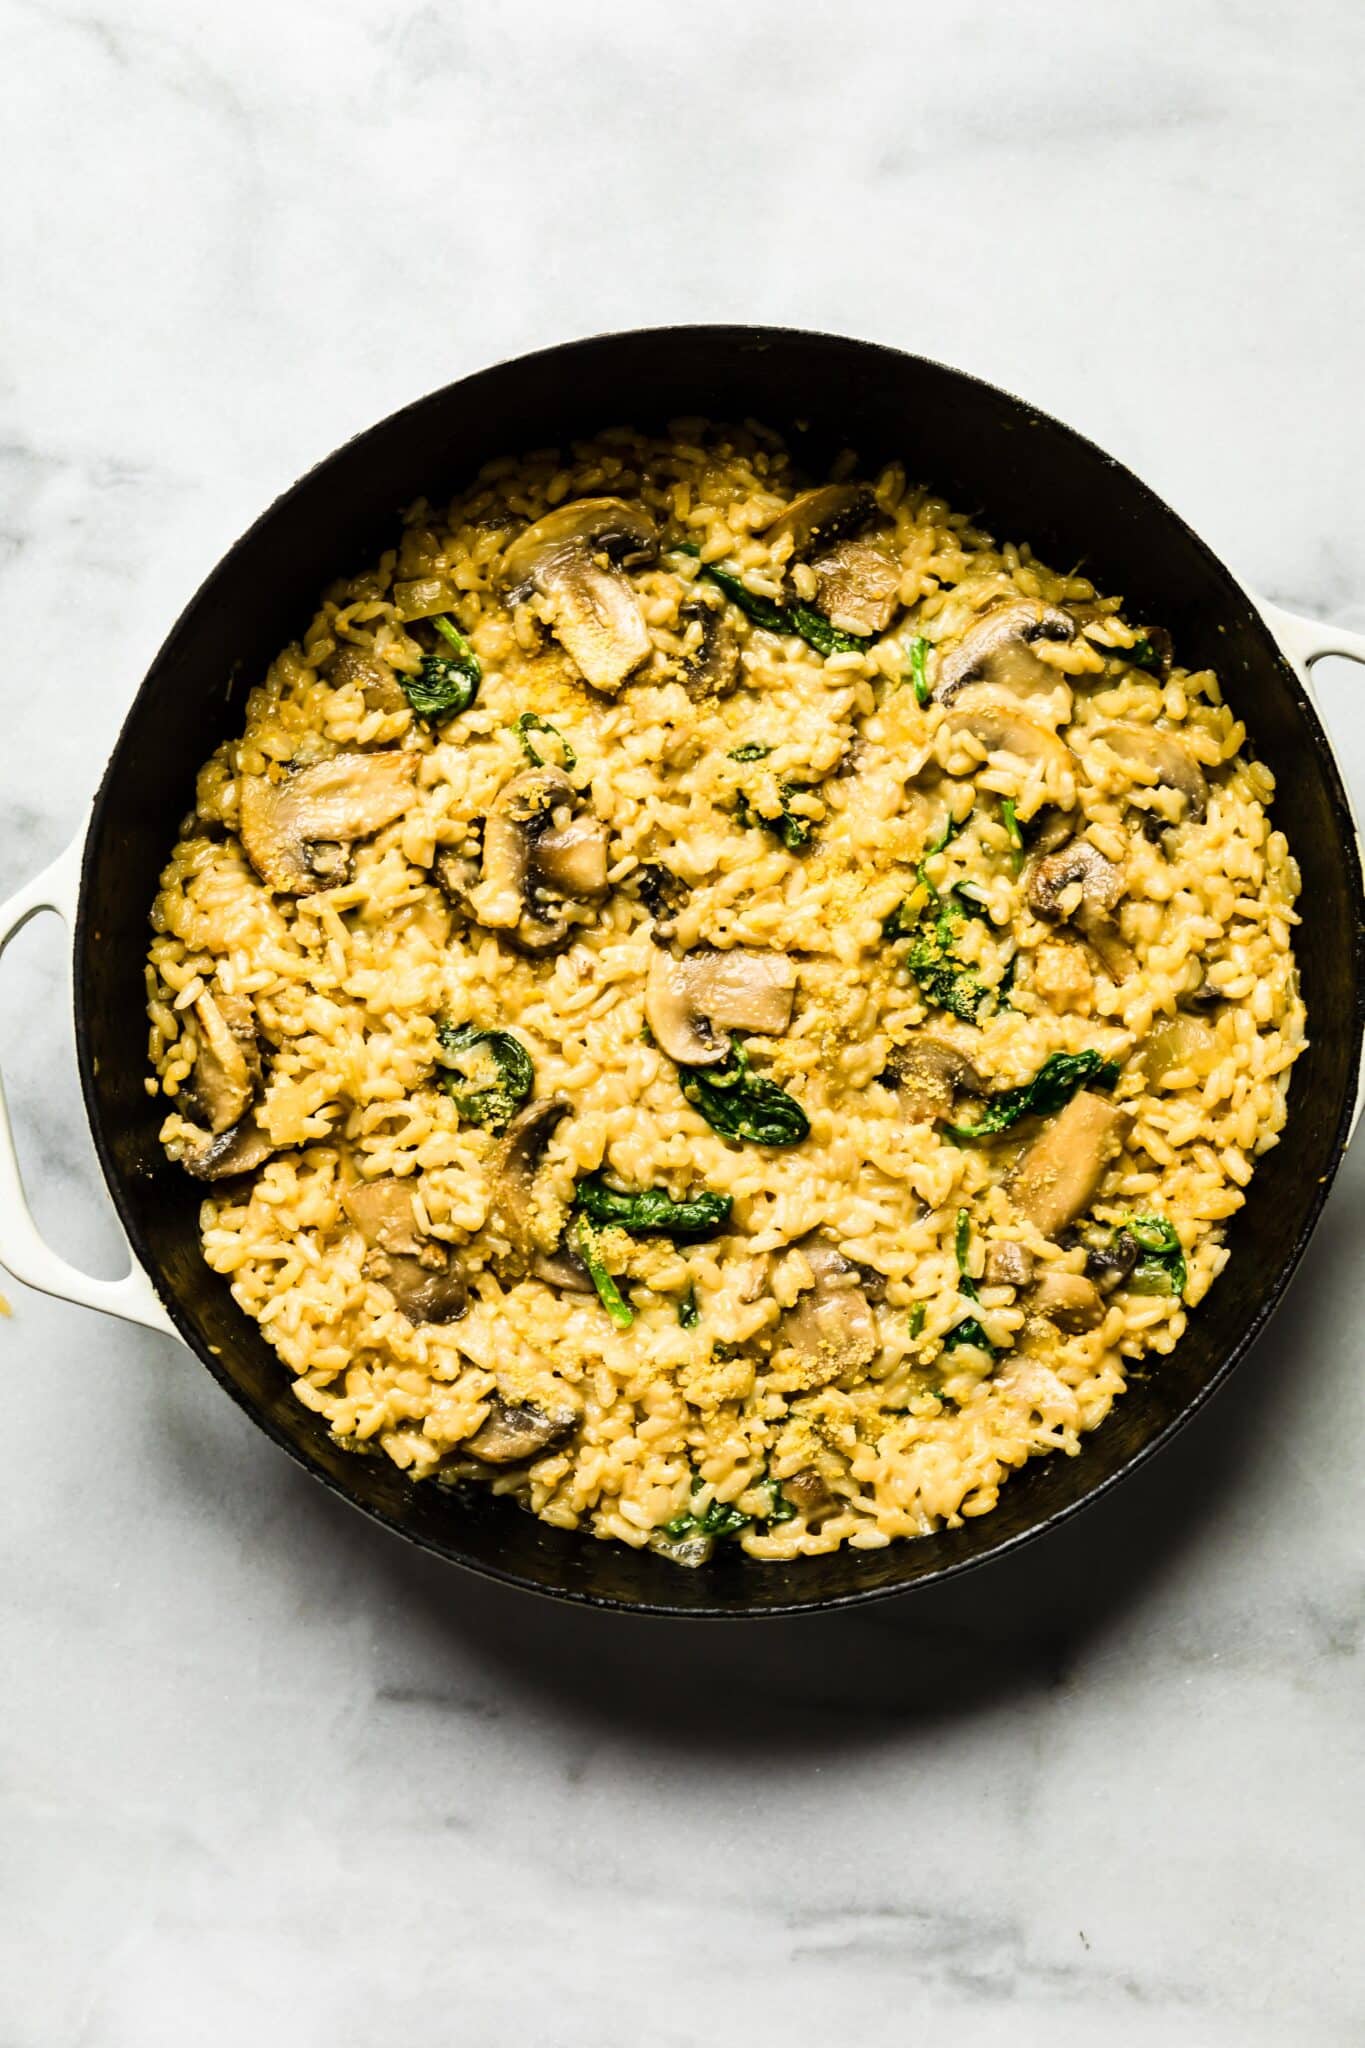 Creamy mushroom risotto in a cast iron pan with spinach and cheese